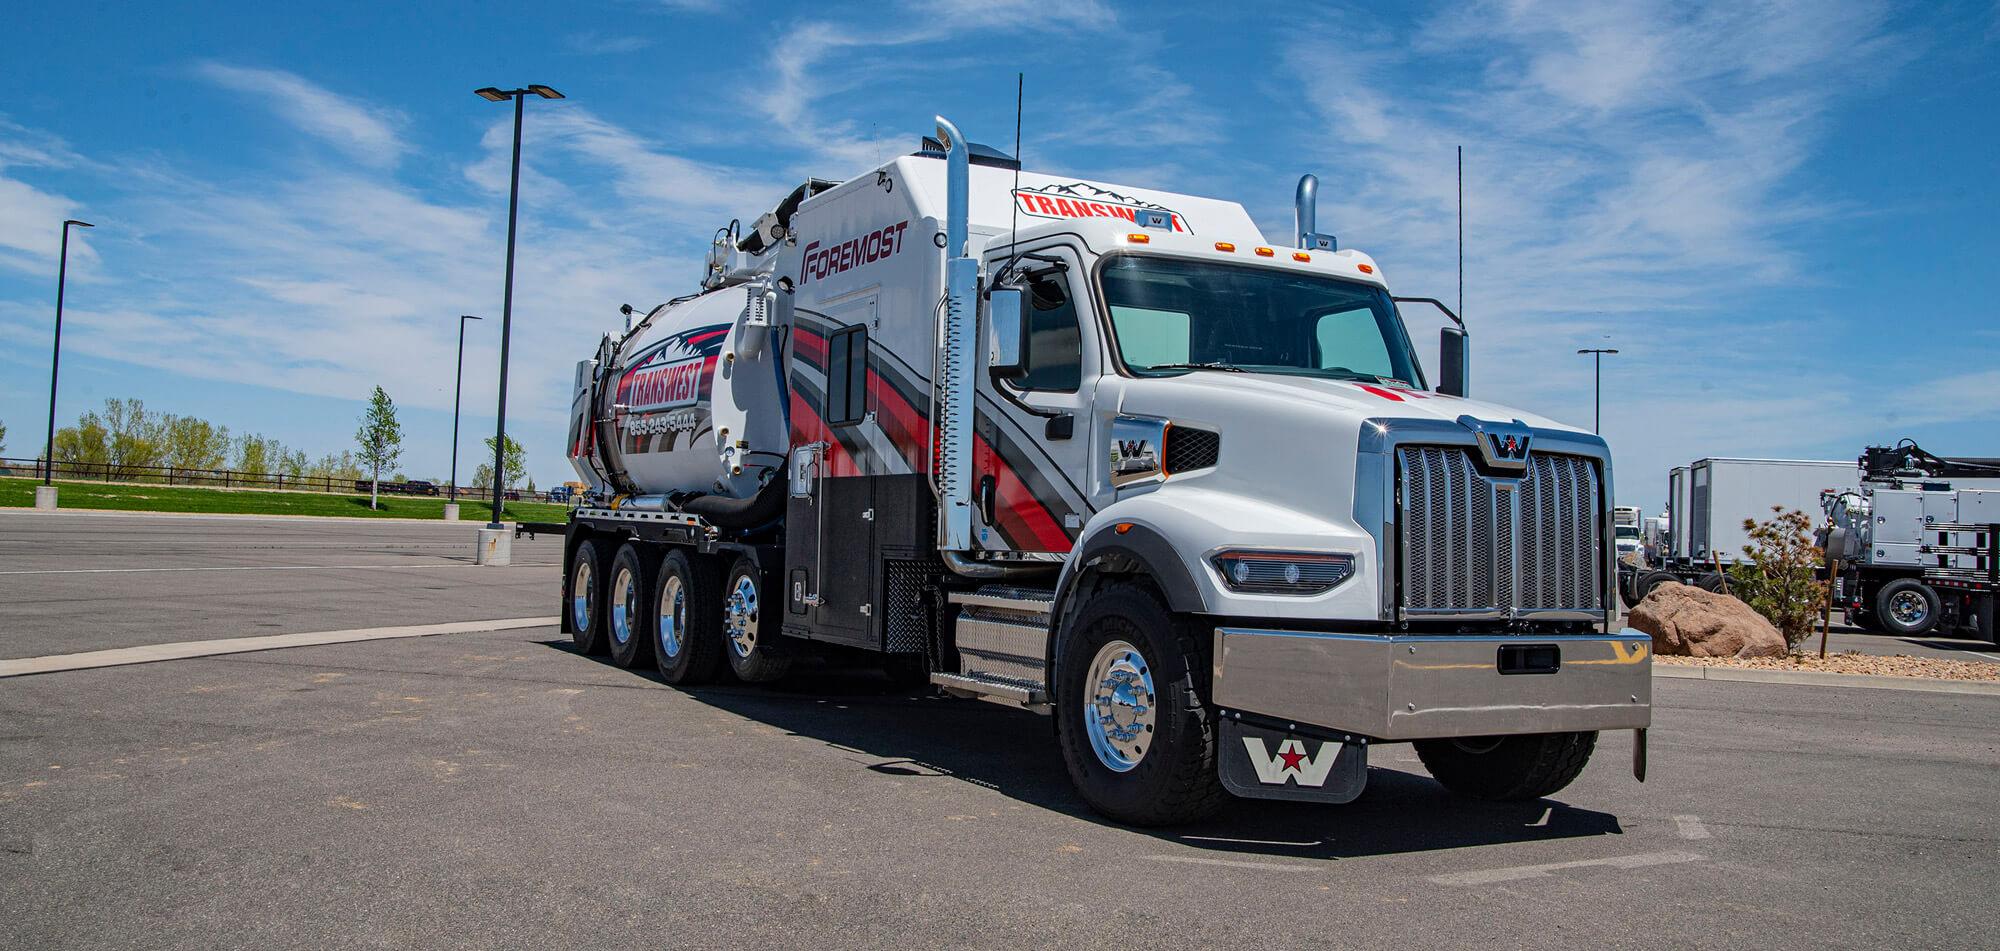 Transwest branded Foremost hydrovac truck